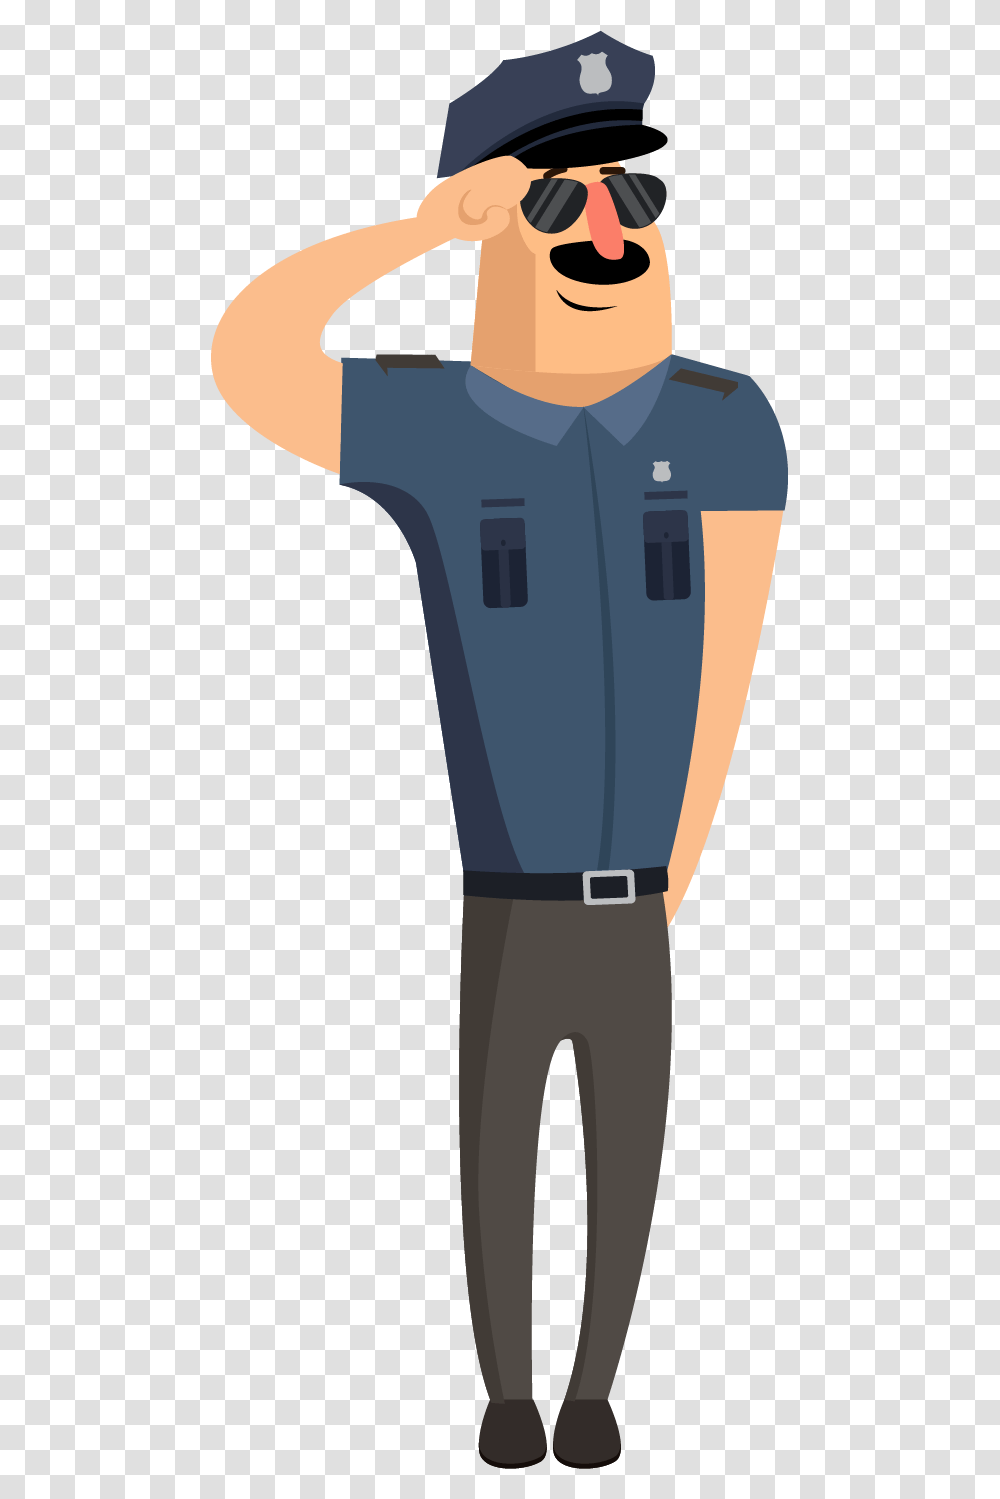 Police Officer Security Guard Security Guard Cartoon, Dryer, Appliance, Blow Dryer, Hair Drier Transparent Png